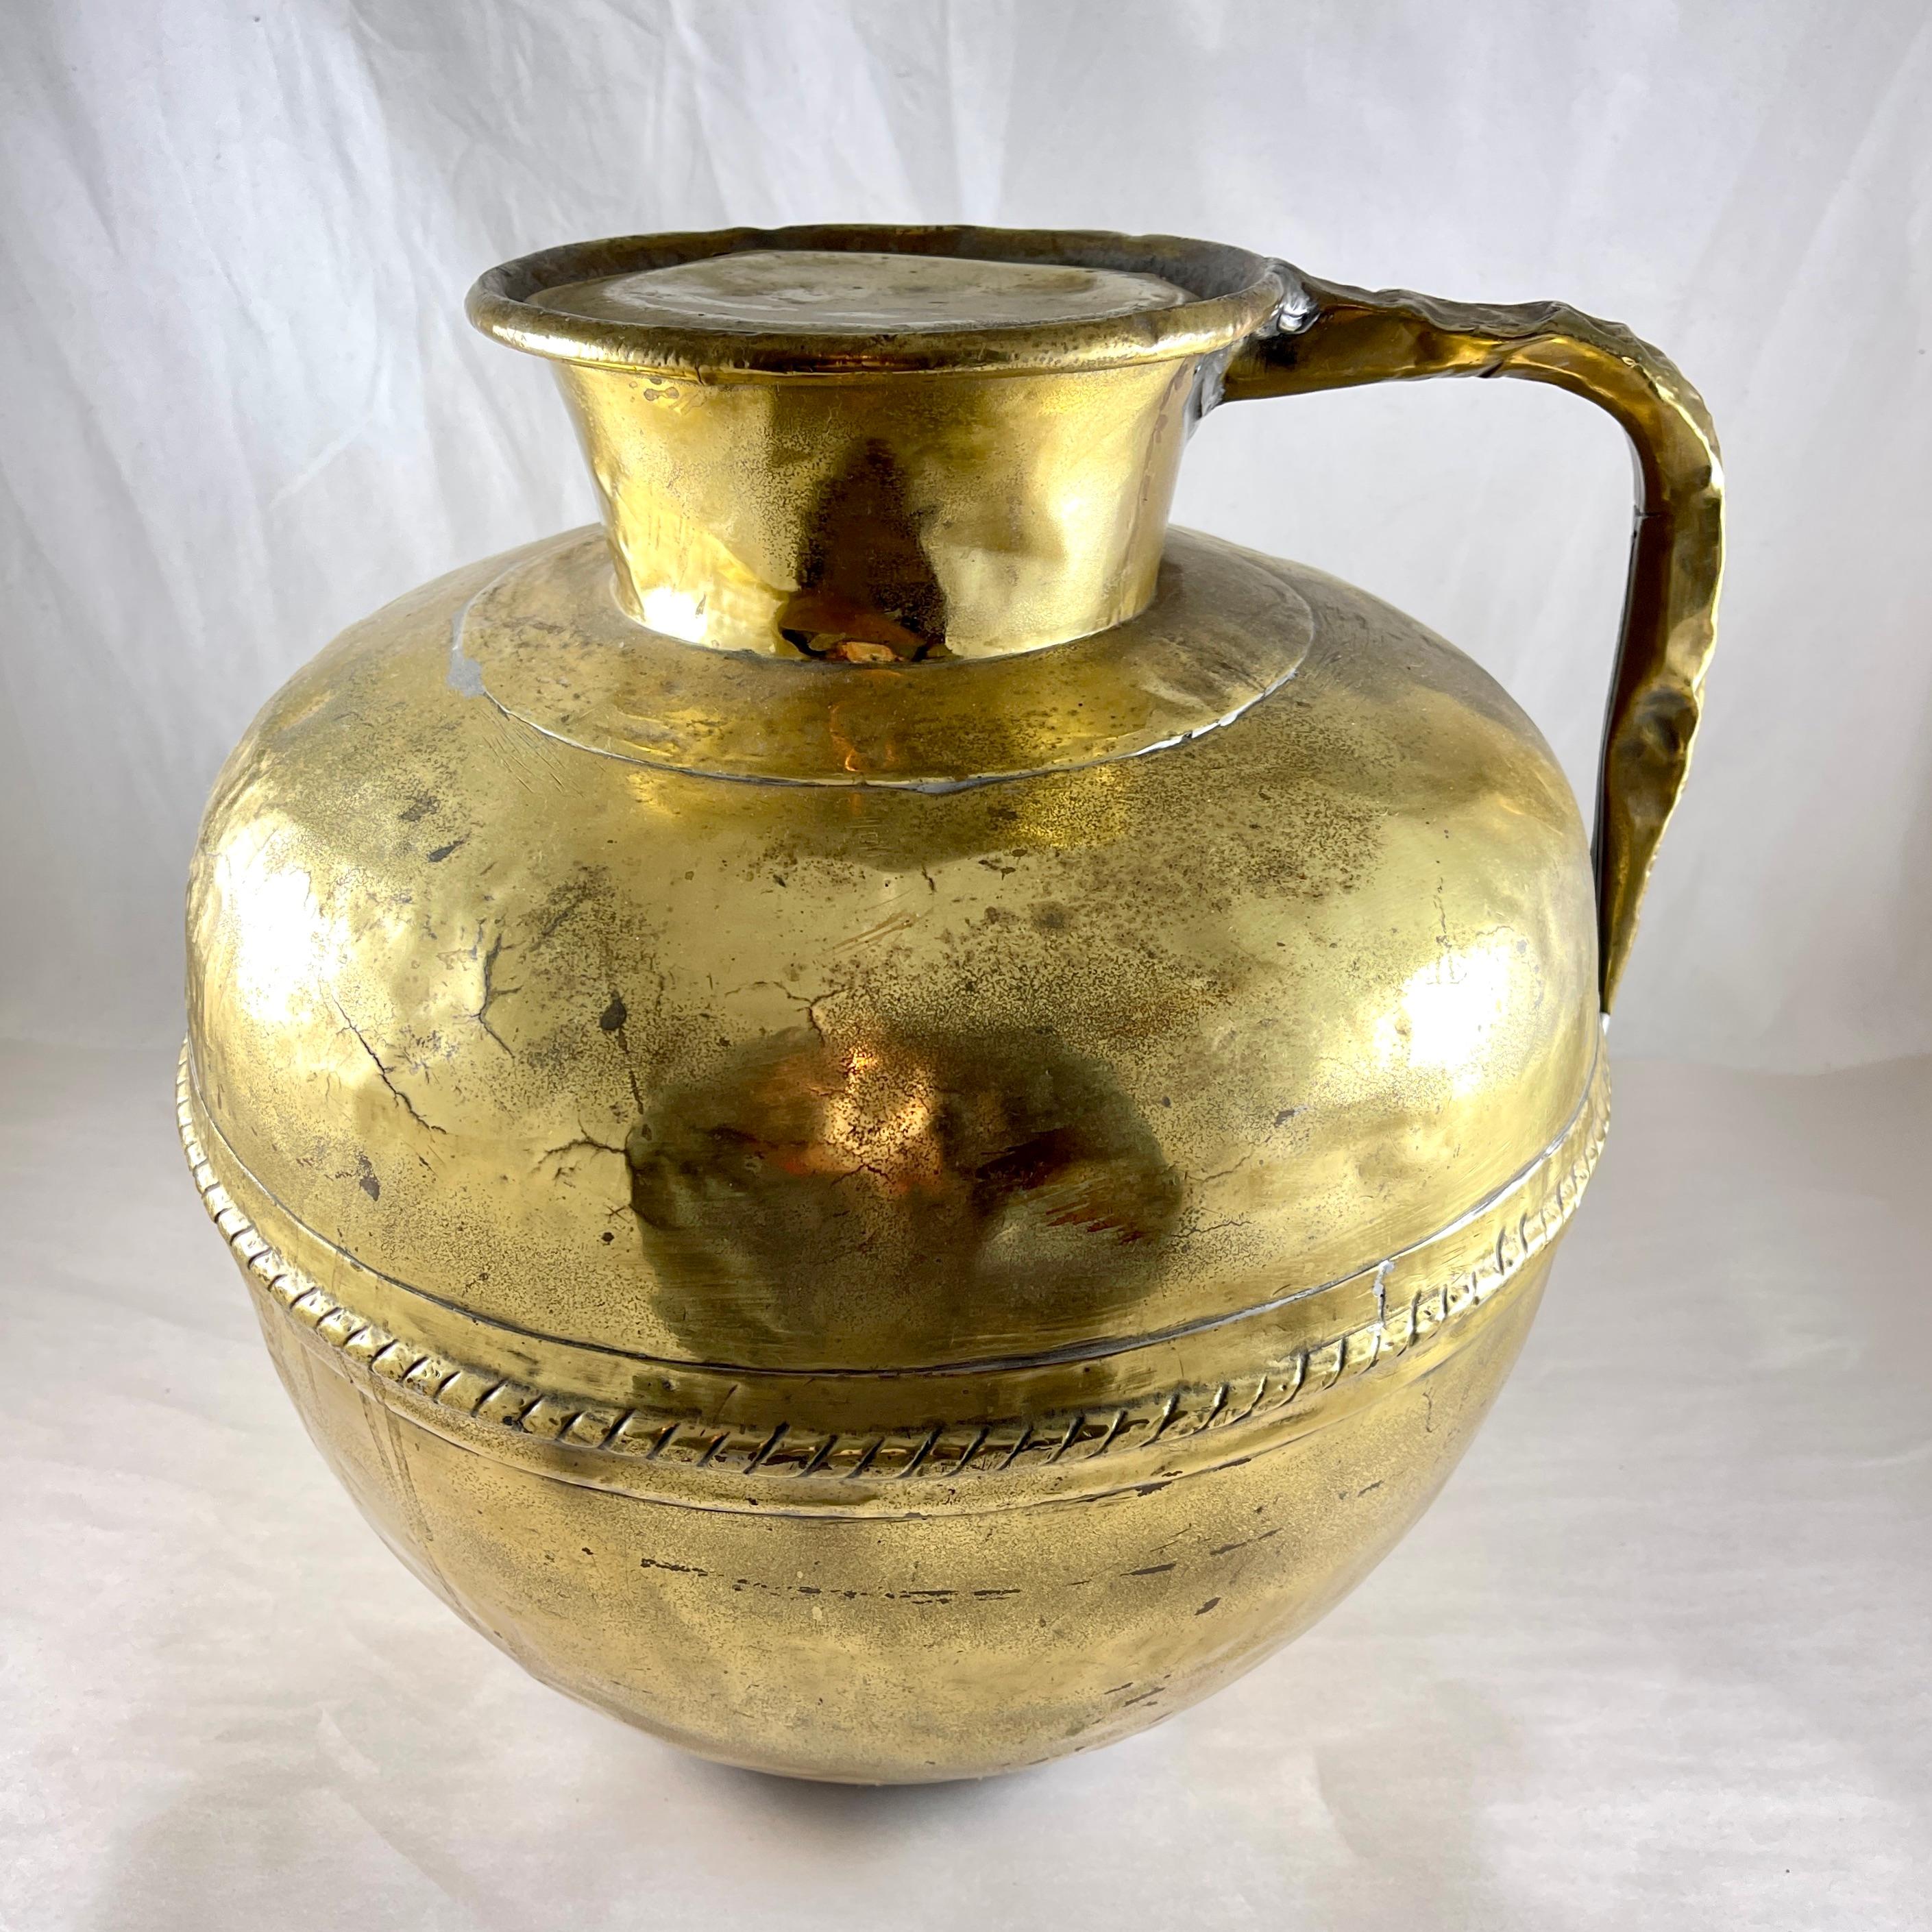 French Normandy Large Rustic Brass Milk Jug with Lid – circa 1850 In Good Condition For Sale In Philadelphia, PA